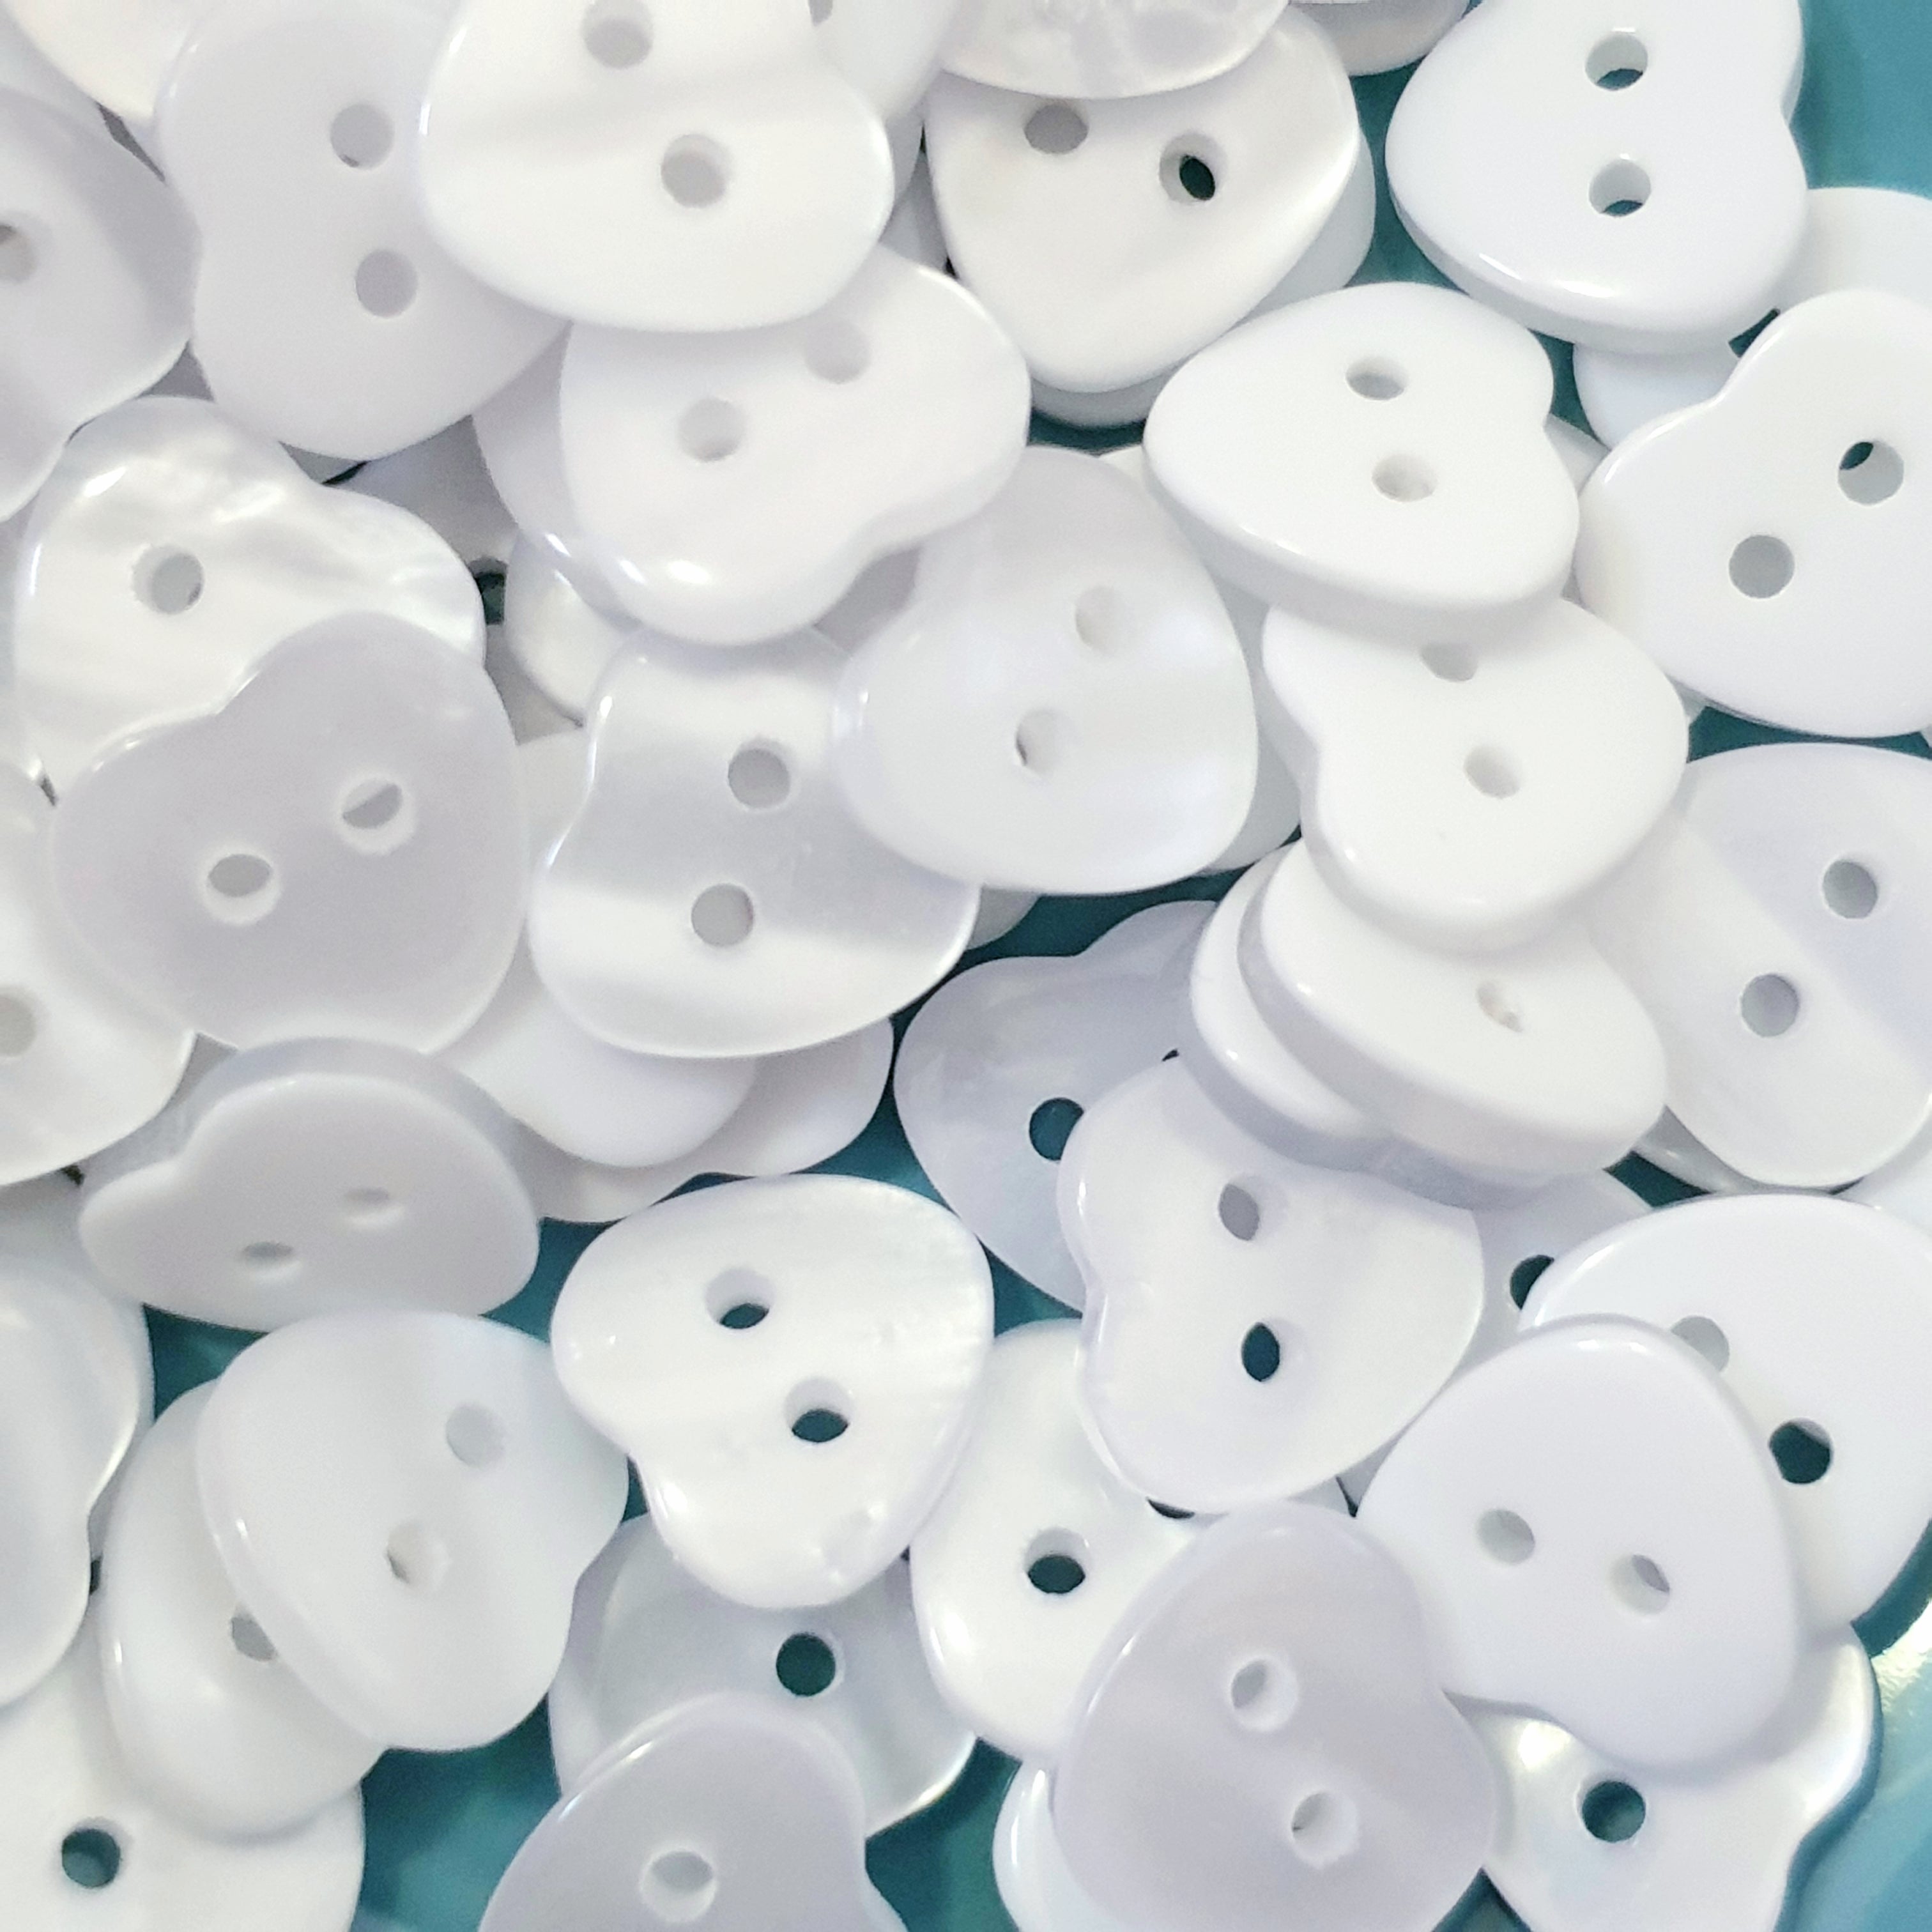 MajorCrafts 40pcs 12.5mm White Pearlescent 2 Holes Heart Resin Sewing Buttons